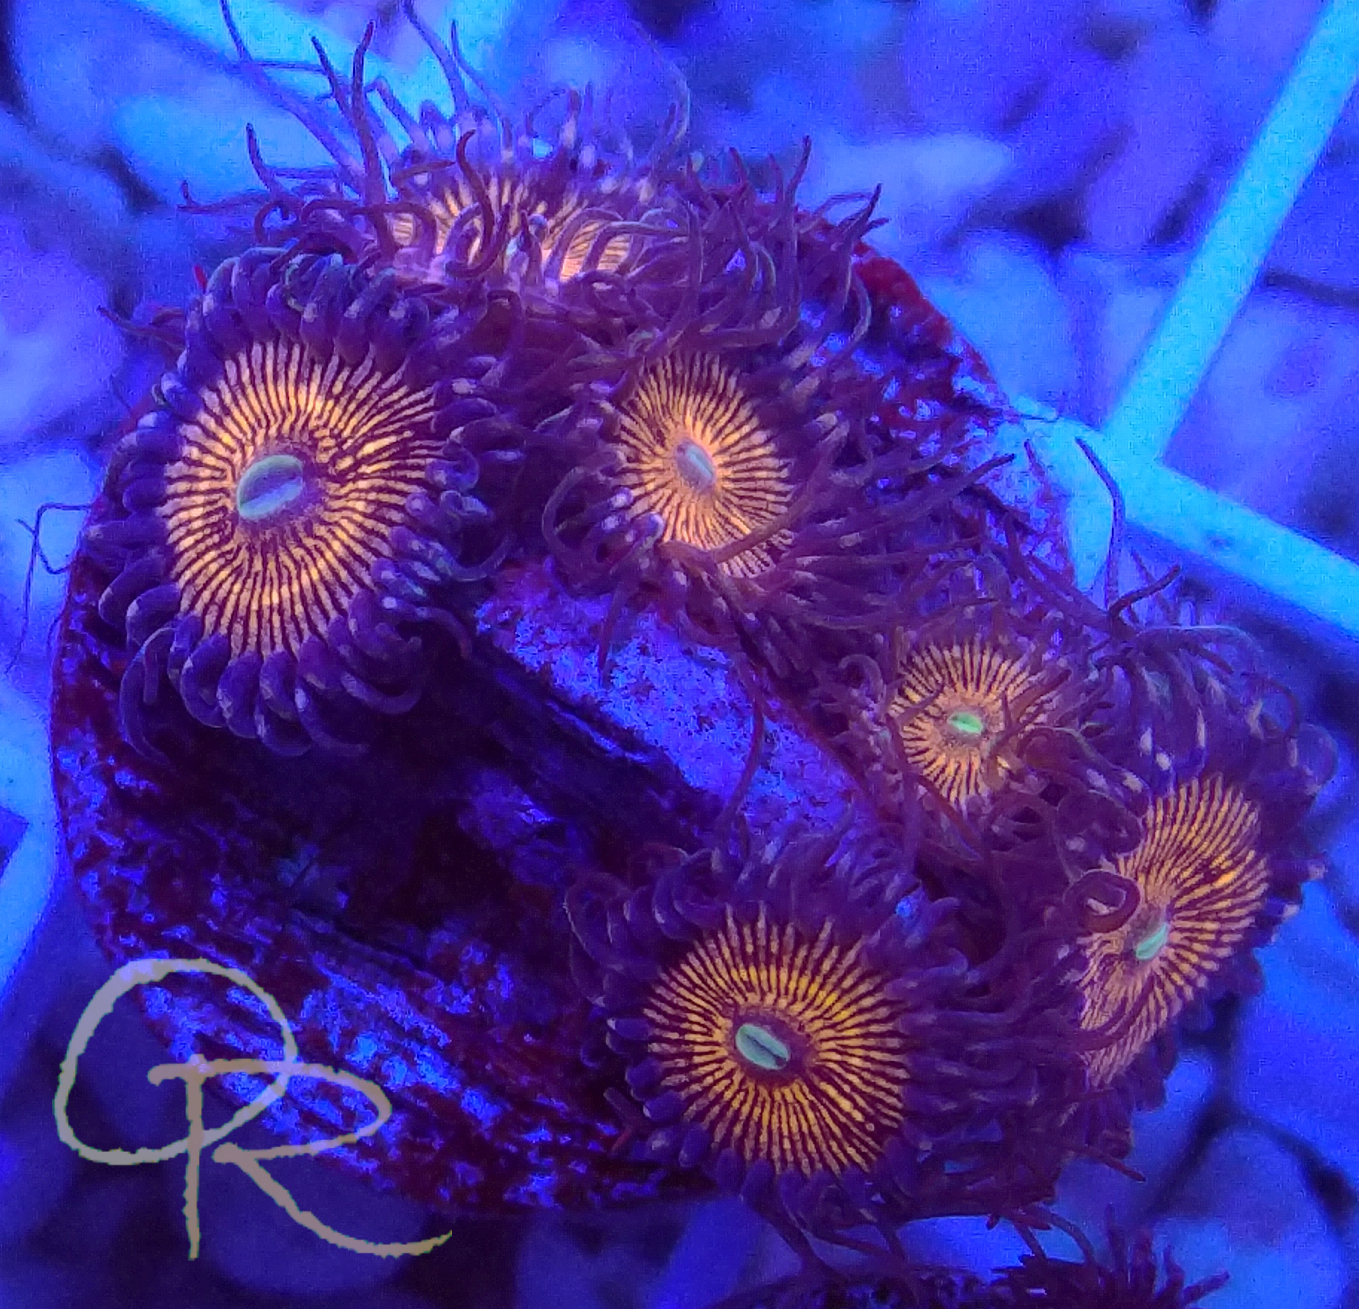 Zoanthids – Hairy People Eaters